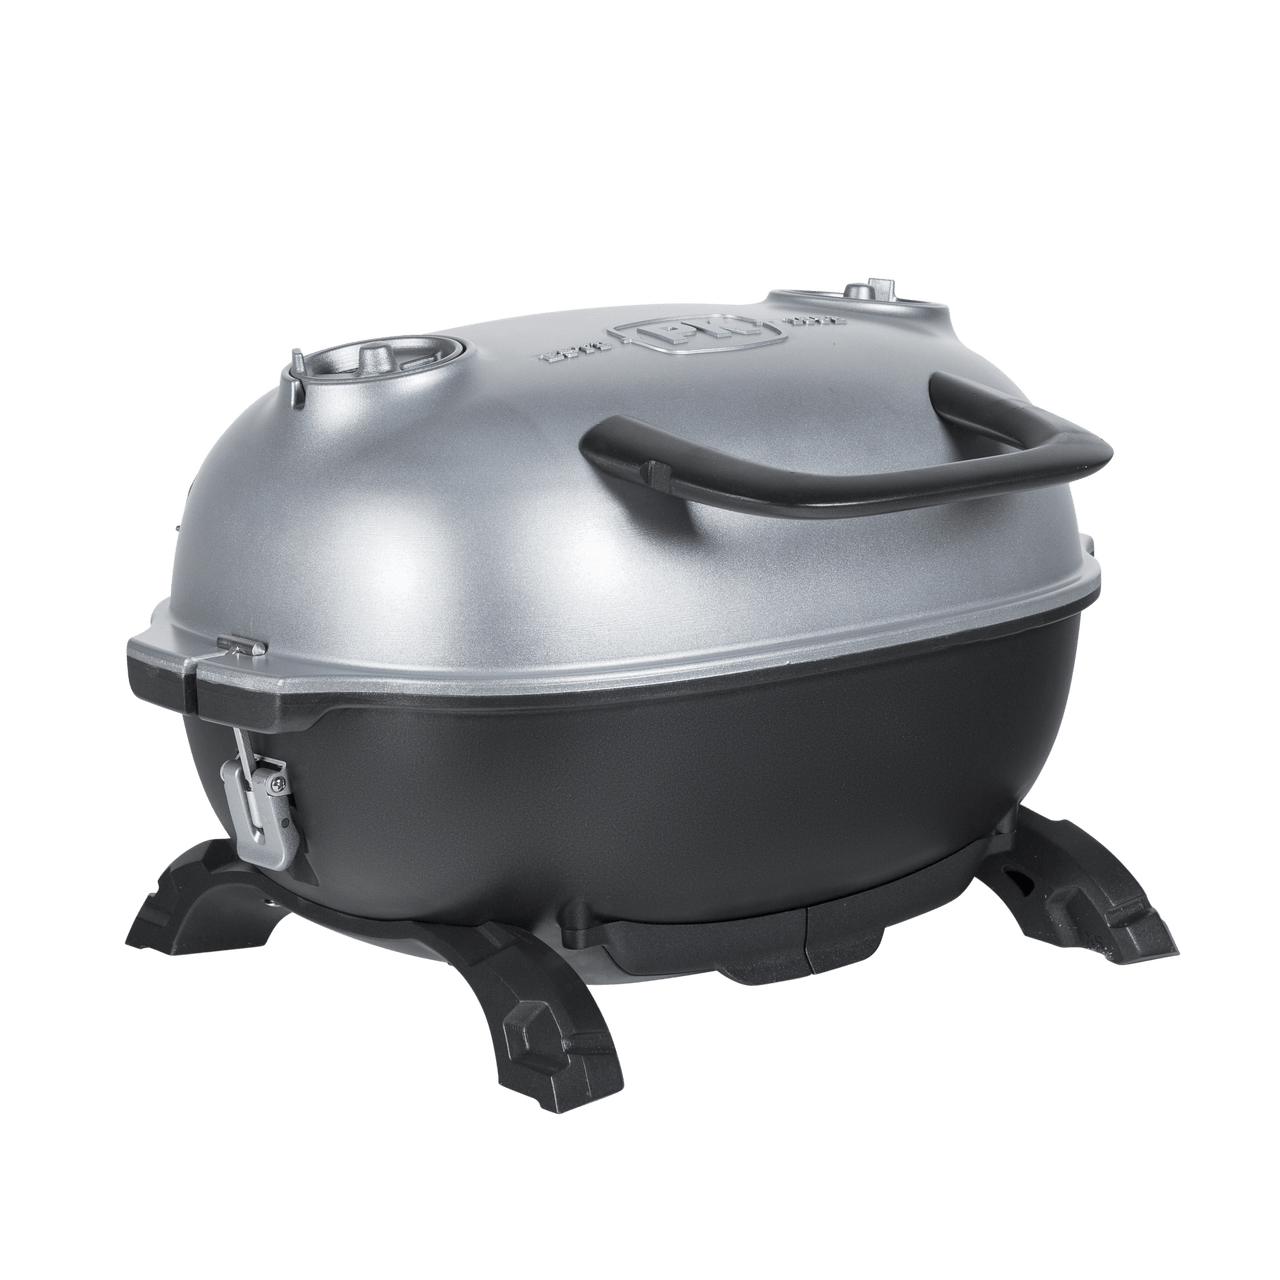 Pk Grills Pkgo The Ultimate Camping And Tabletop Grill Pro Smoke q